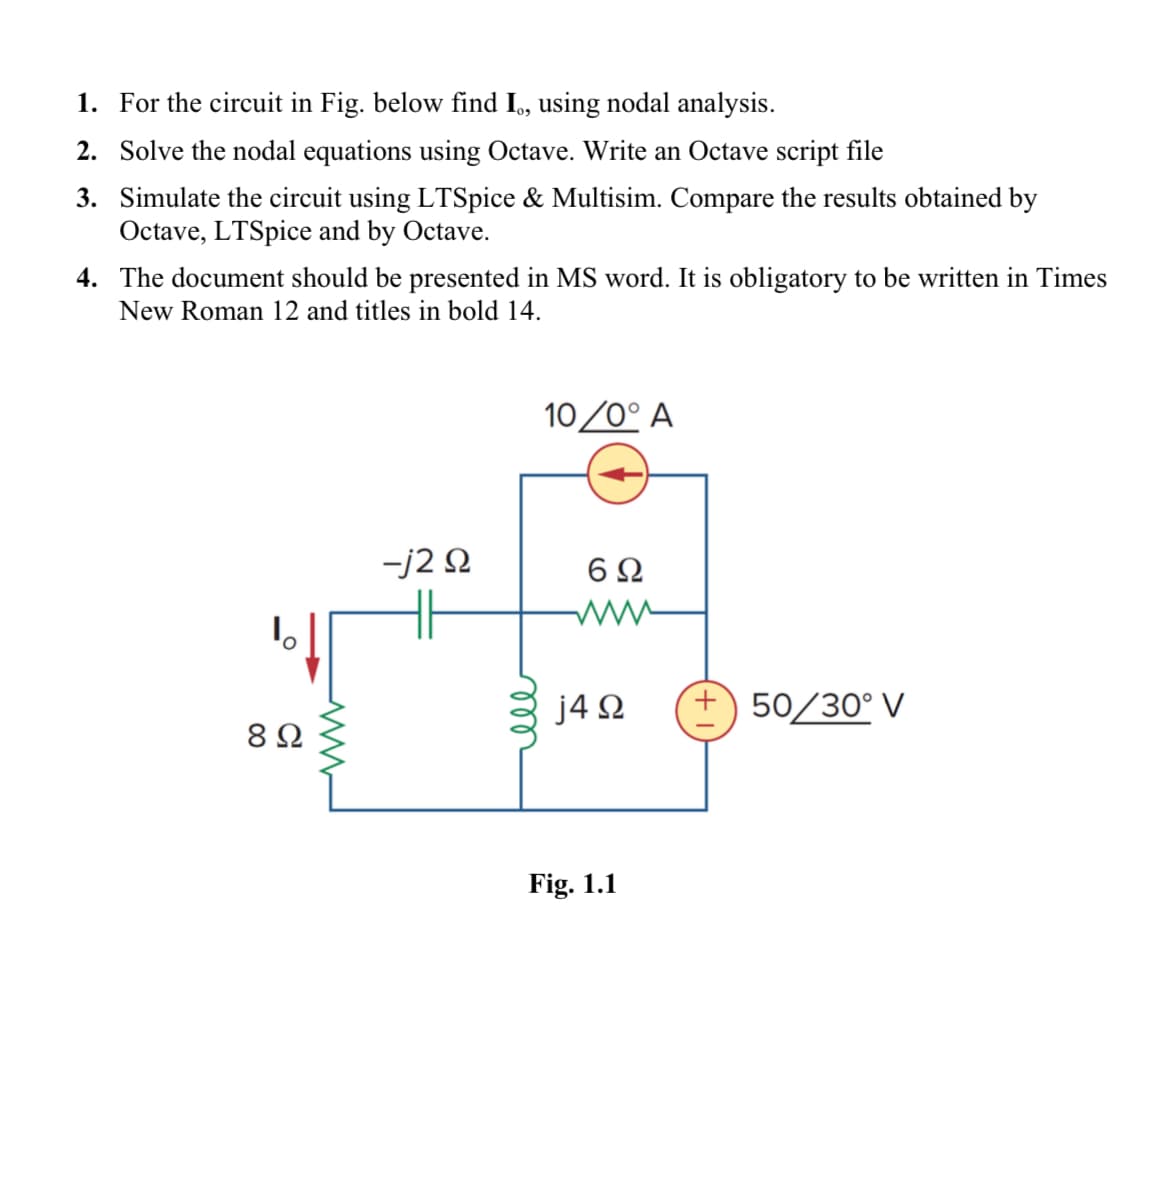 1. For the circuit in Fig. below find I, using nodal analysis.
2. Solve the nodal equations using Octave. Write an Octave script file
3. Simulate the circuit using LTSpice & Multisim. Compare the results obtained by
Octave, LTSpice and by Octave.
4. The document should be presented in MS word. It is obligatory to be written in Times
New Roman 12 and titles in bold 14.
1。
8 Ω
-j2 9
10/0° A
6Ω
j4Ω
Fig. 1.1
+ 50/30° V